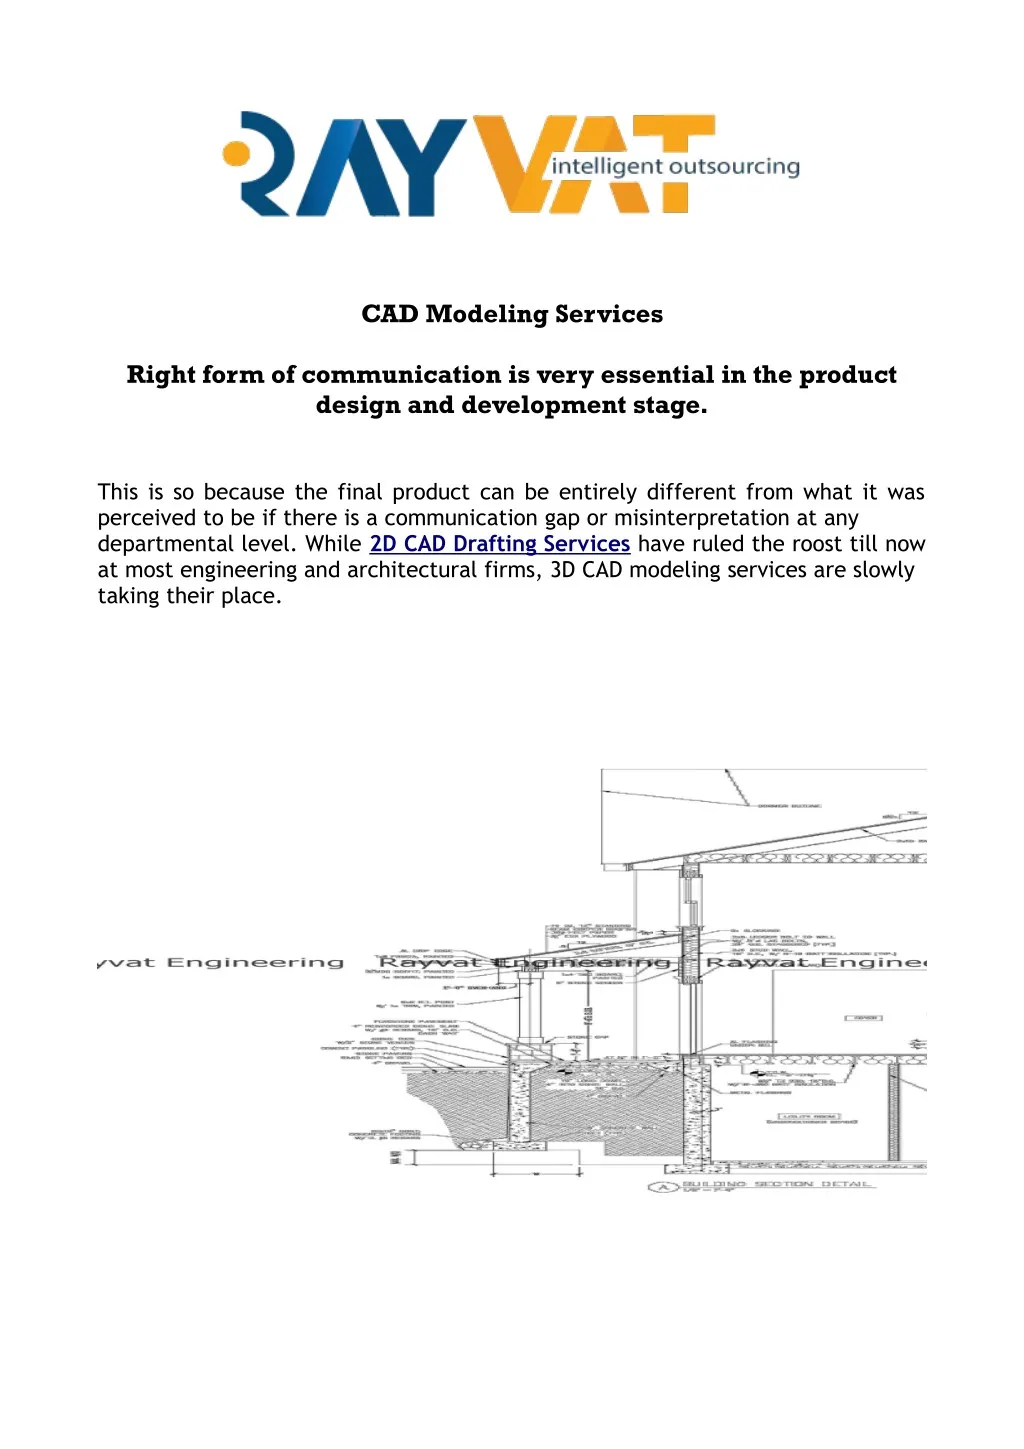 cad modeling services